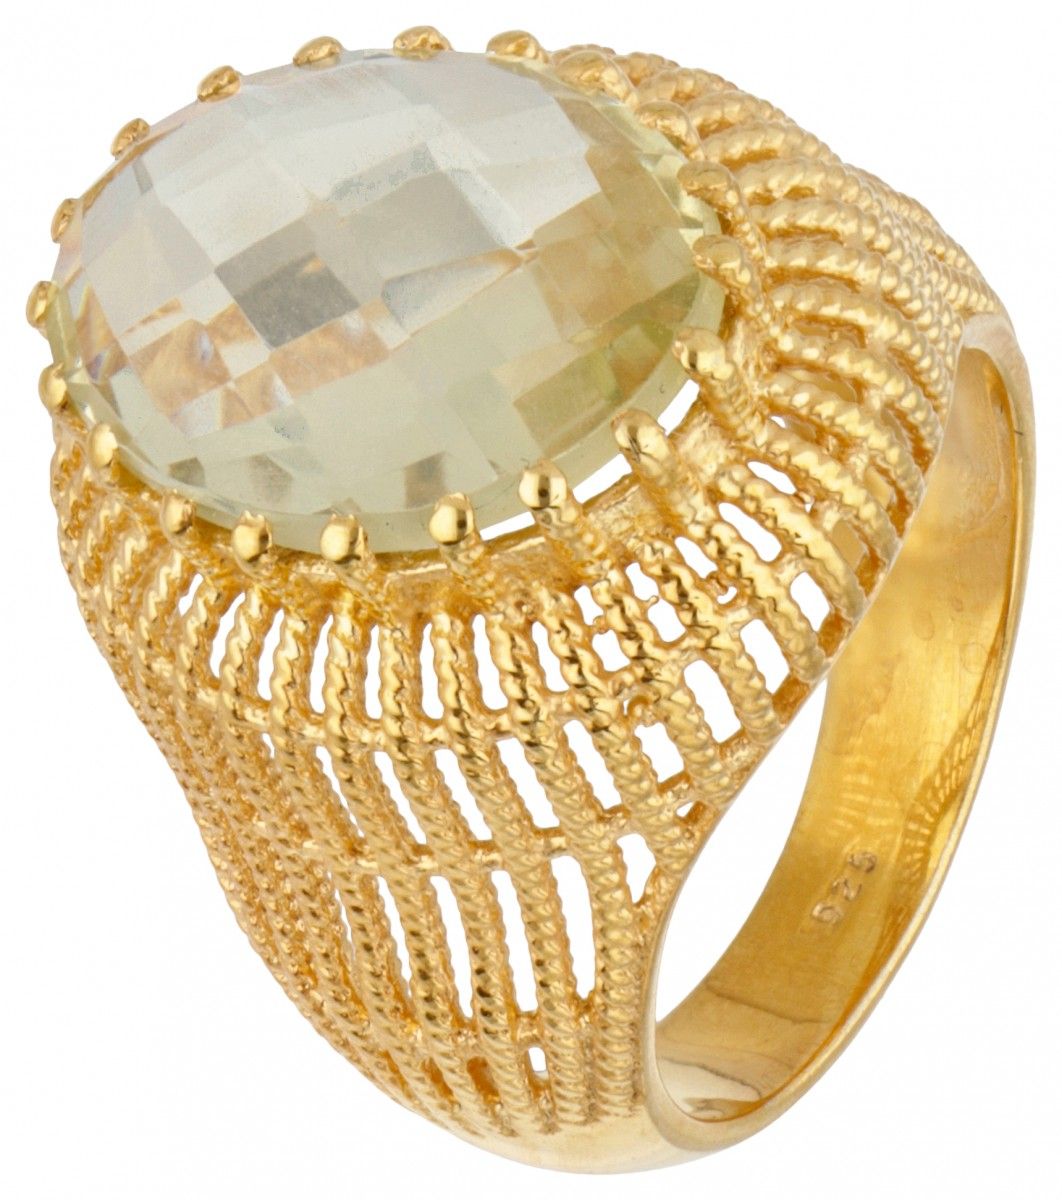 Gold plated silver ring set with approx. 5.98 ct. Lemon quartz - 925/1000. Poinç&hellip;